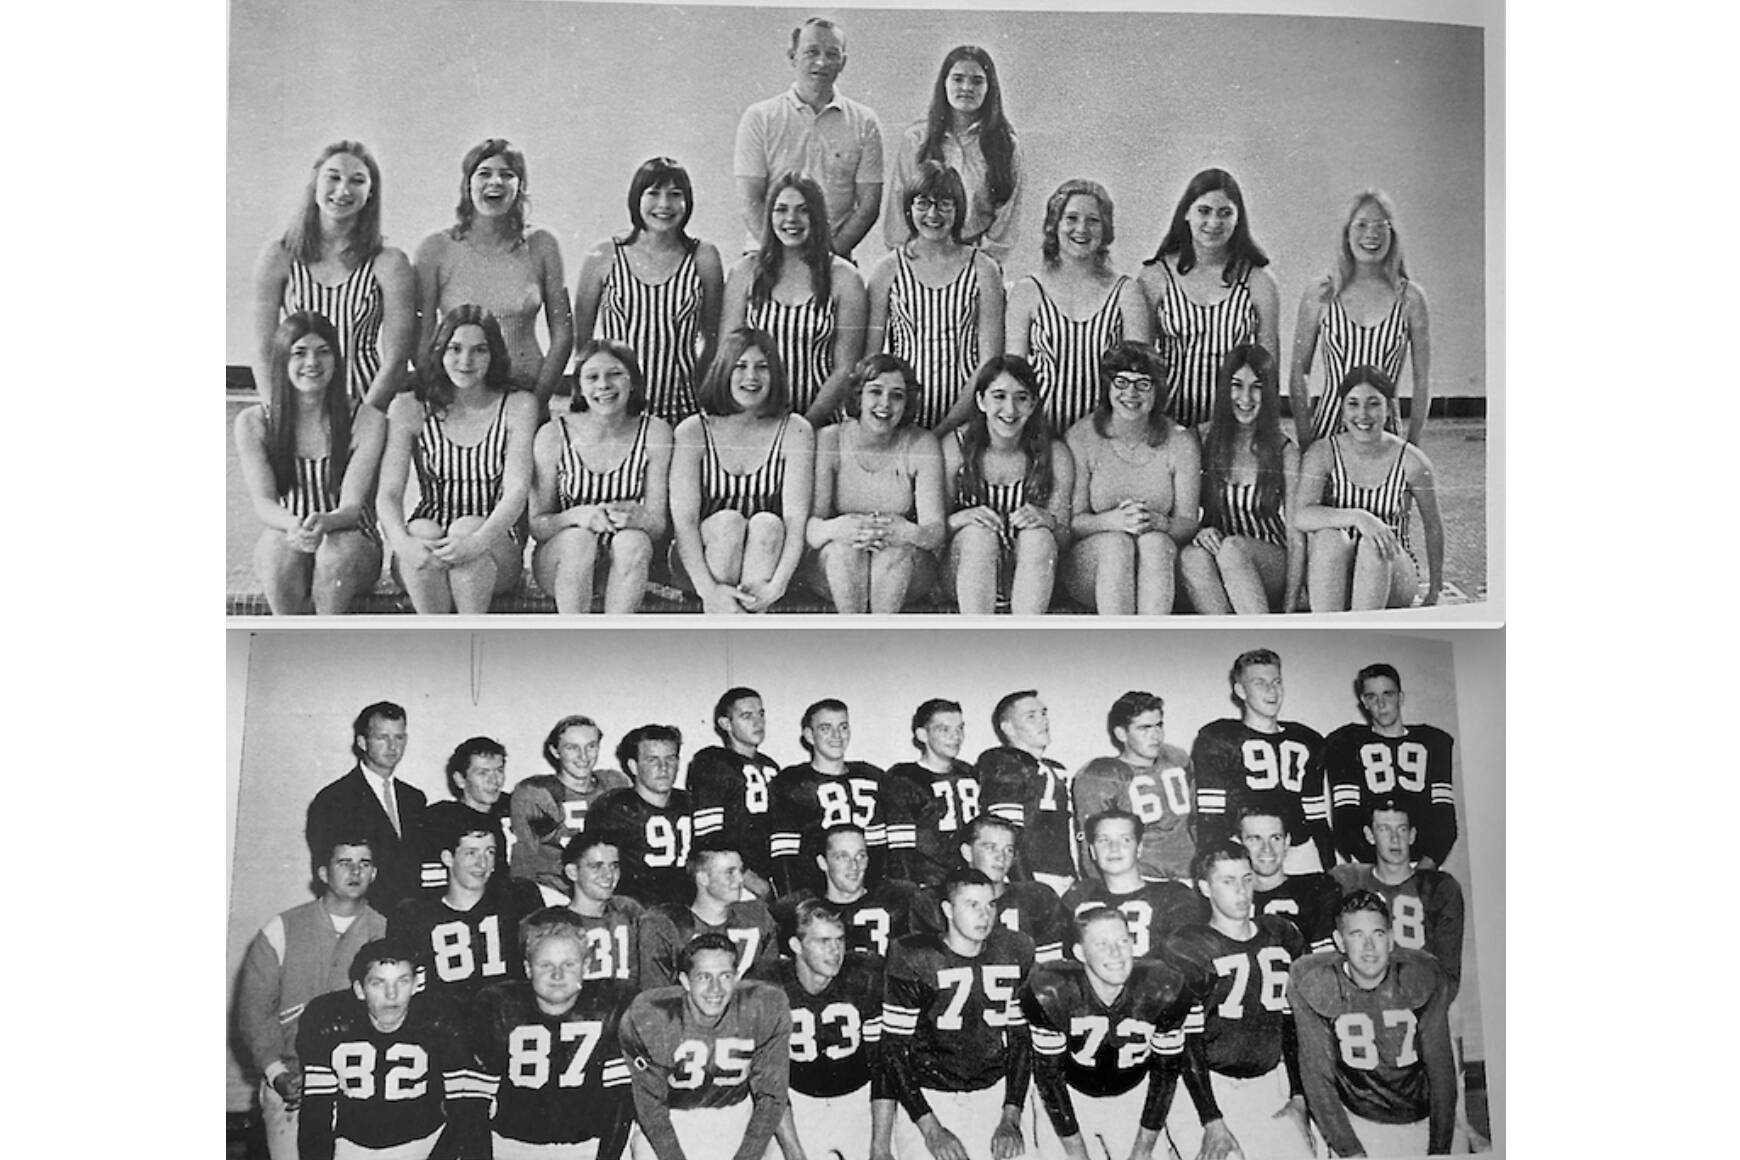 The 1972 Port Angeles girls swim team, the first girls team at the high school after Title IX passed, and the 1956 Roughriders' football team that went 7-1 will be inducted in August into the Port Angeles Hall of Fame.